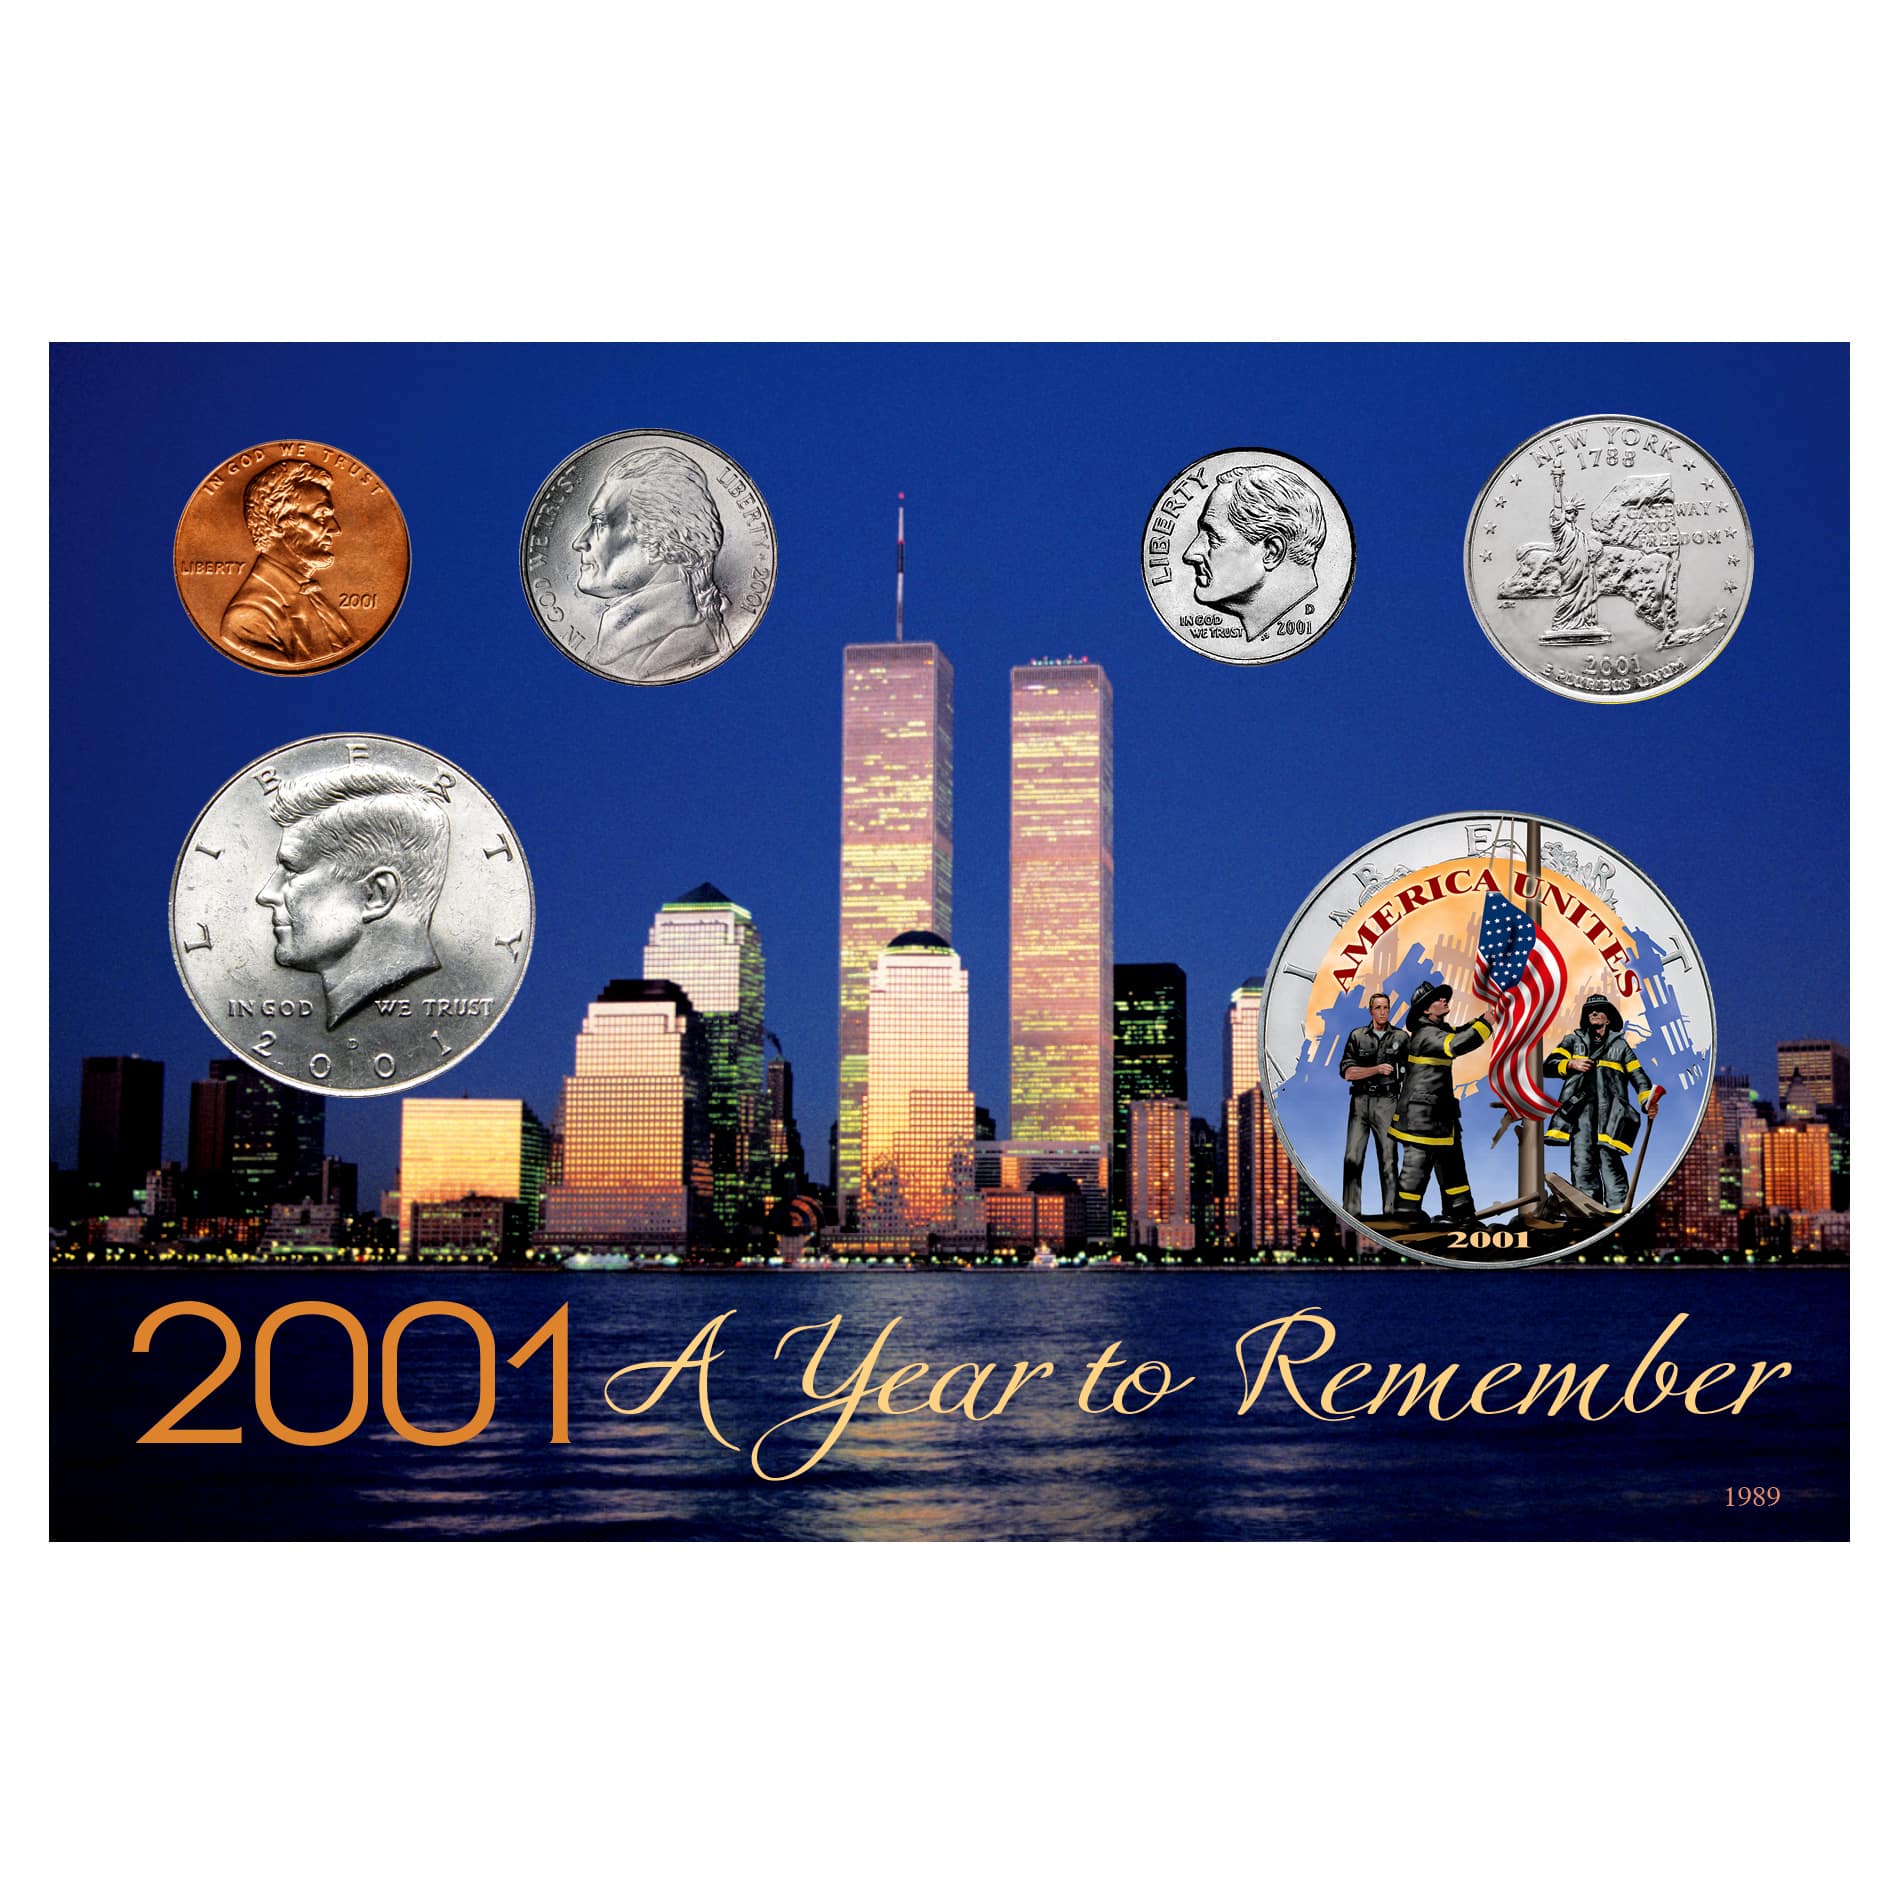 2001 A Year to Remember